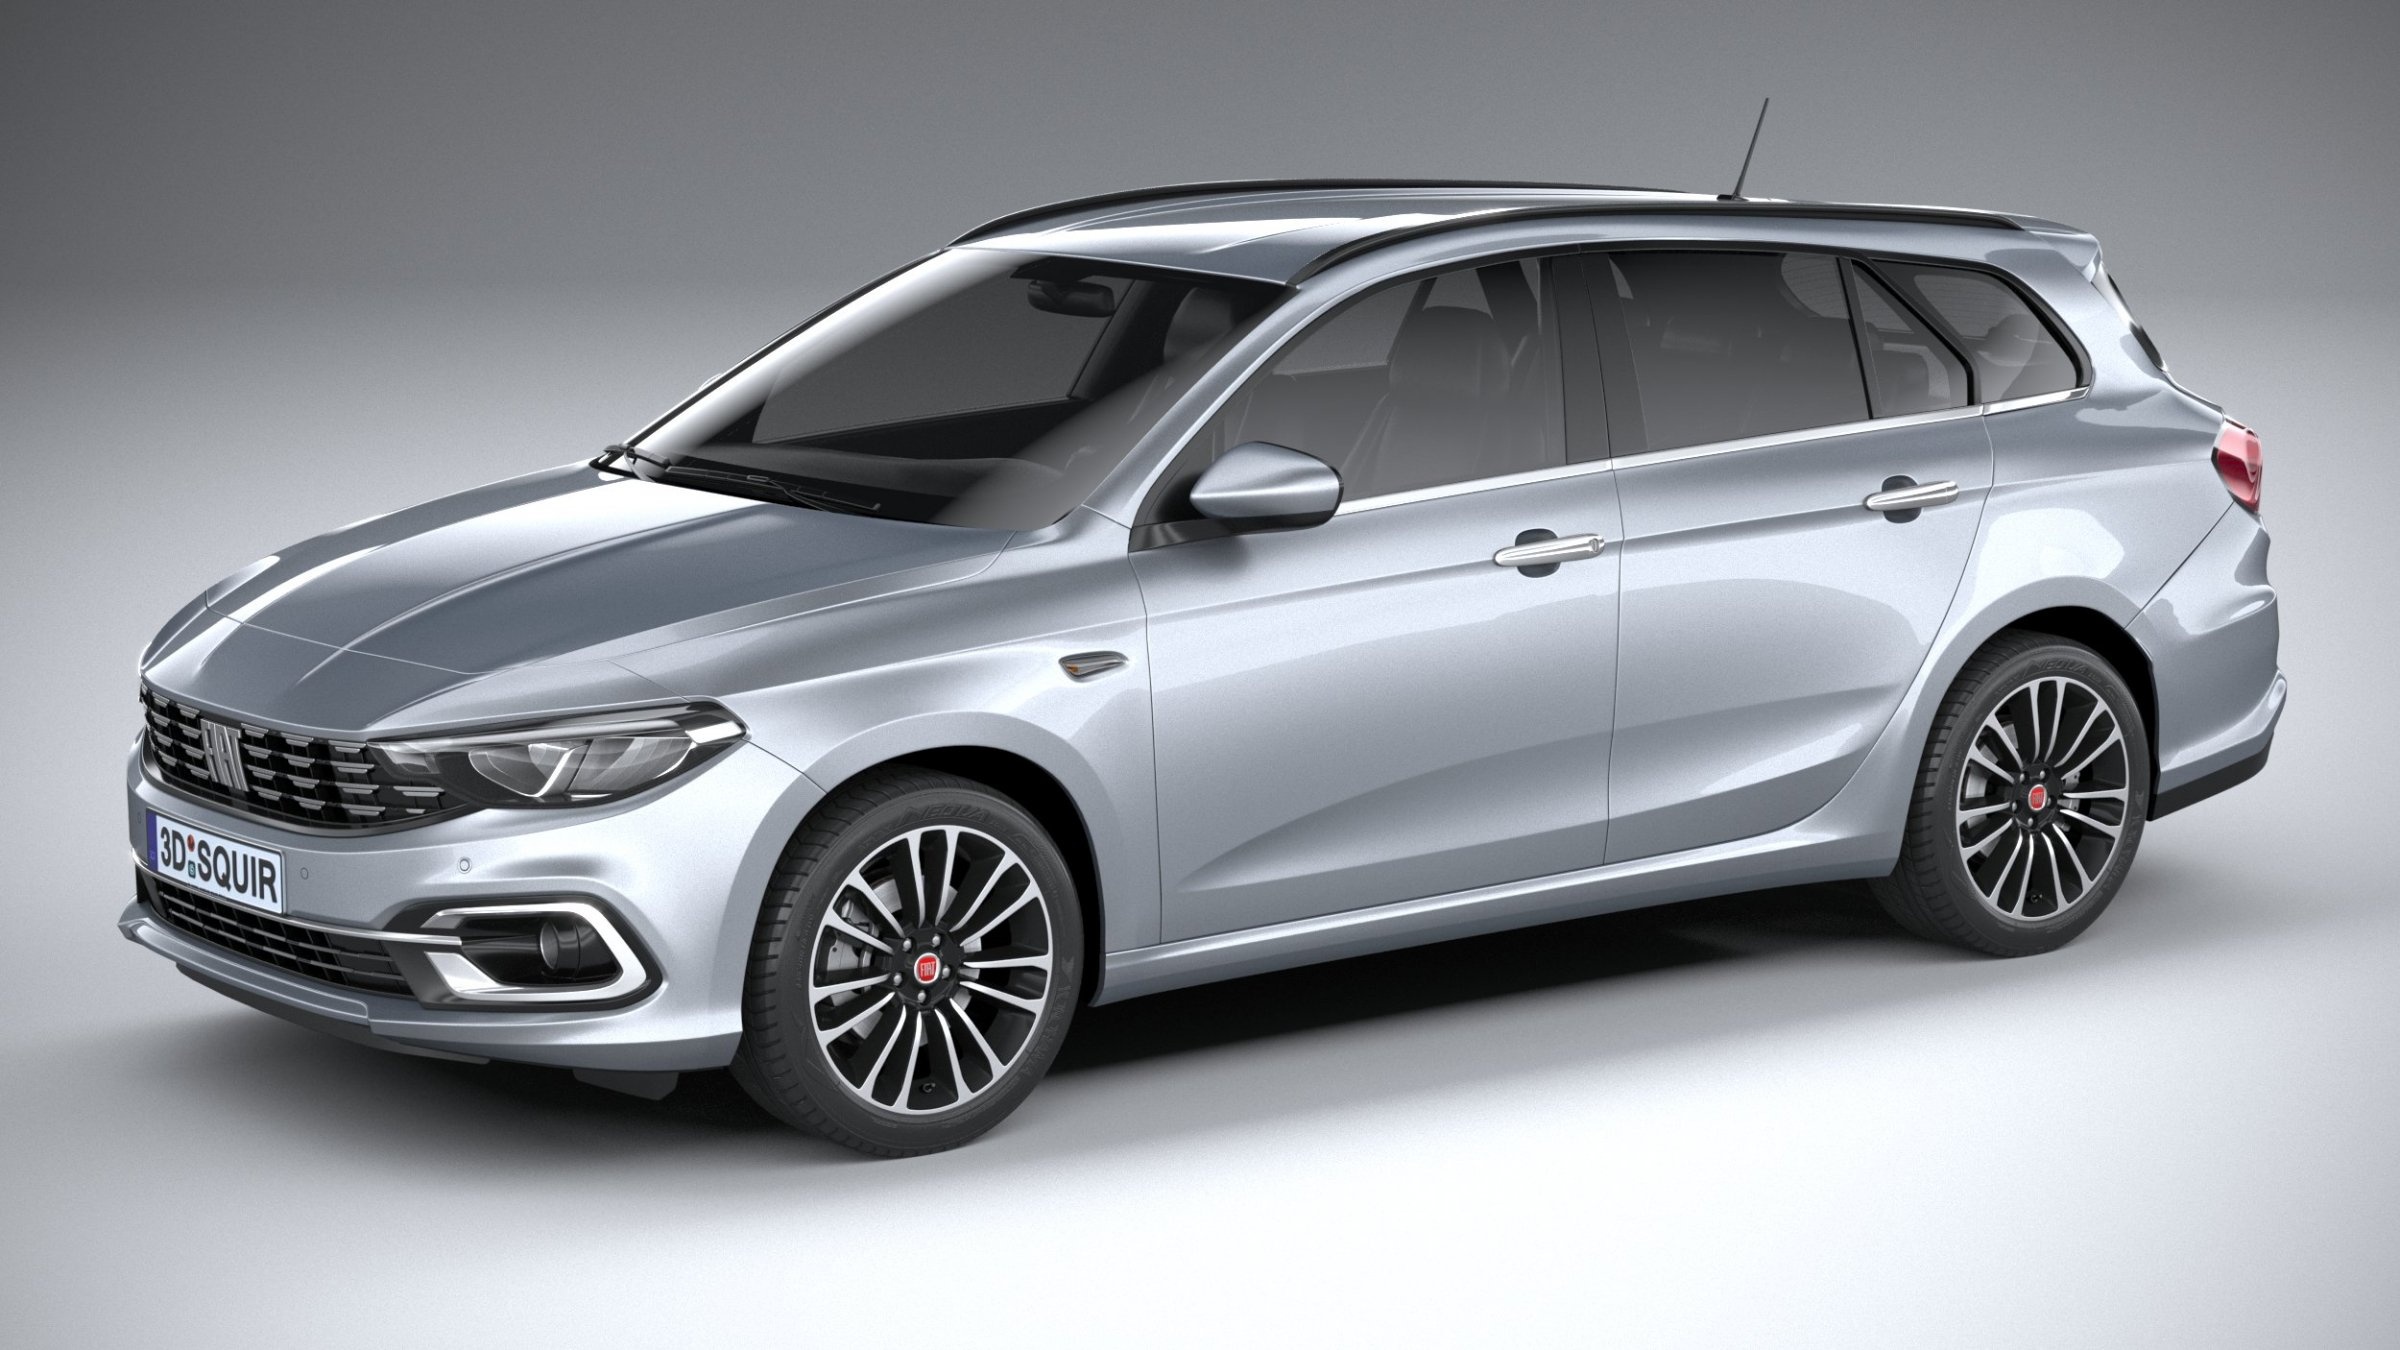 Fiat Tipo Station Wagon, Auto industry, 2021 model, Squir, 2400x1350 HD Desktop